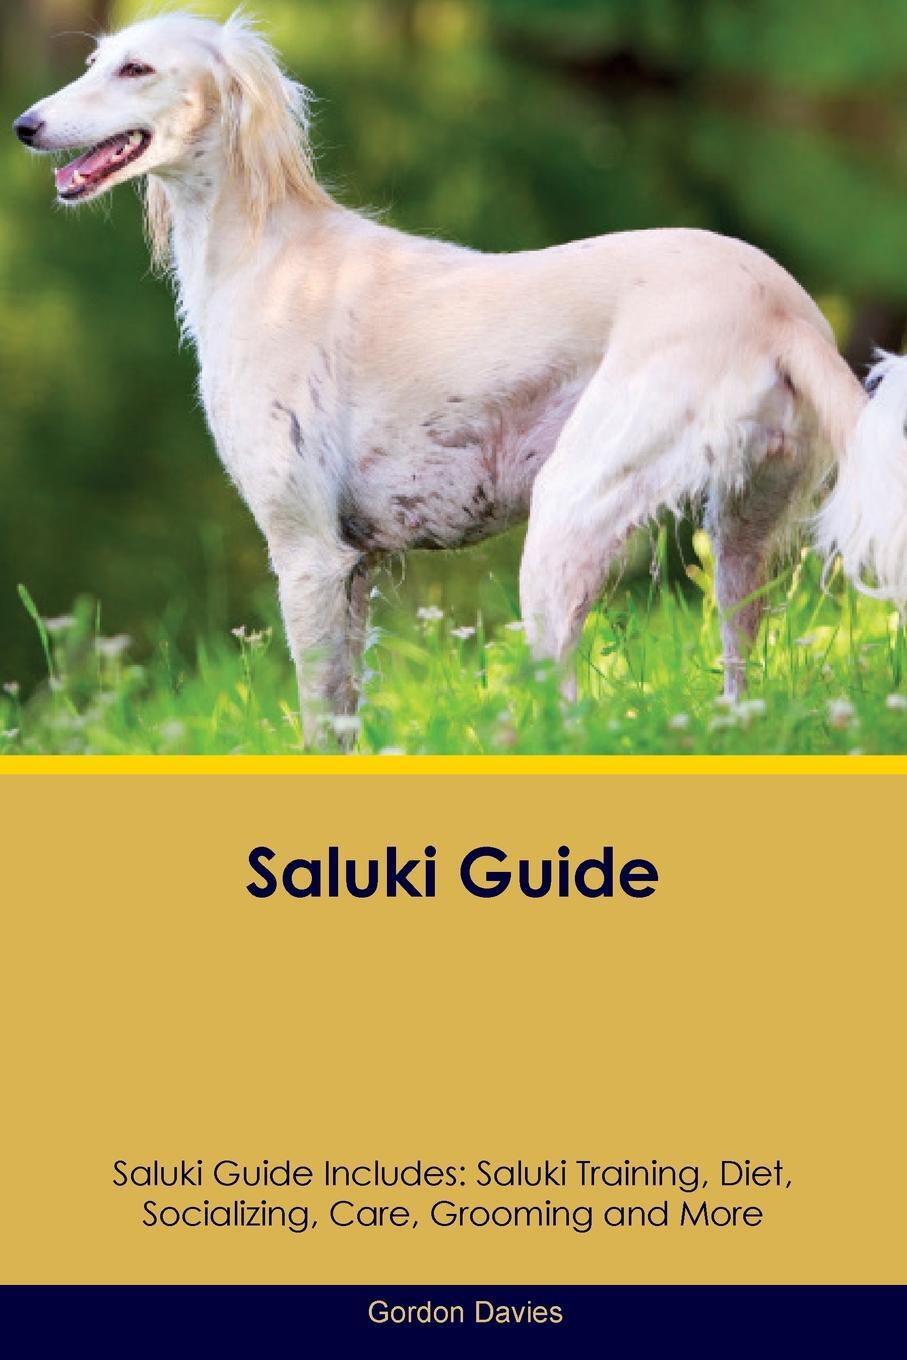 фото Saluki Guide Saluki Guide Includes. Saluki Training, Diet, Socializing, Care, Grooming, Breeding and More